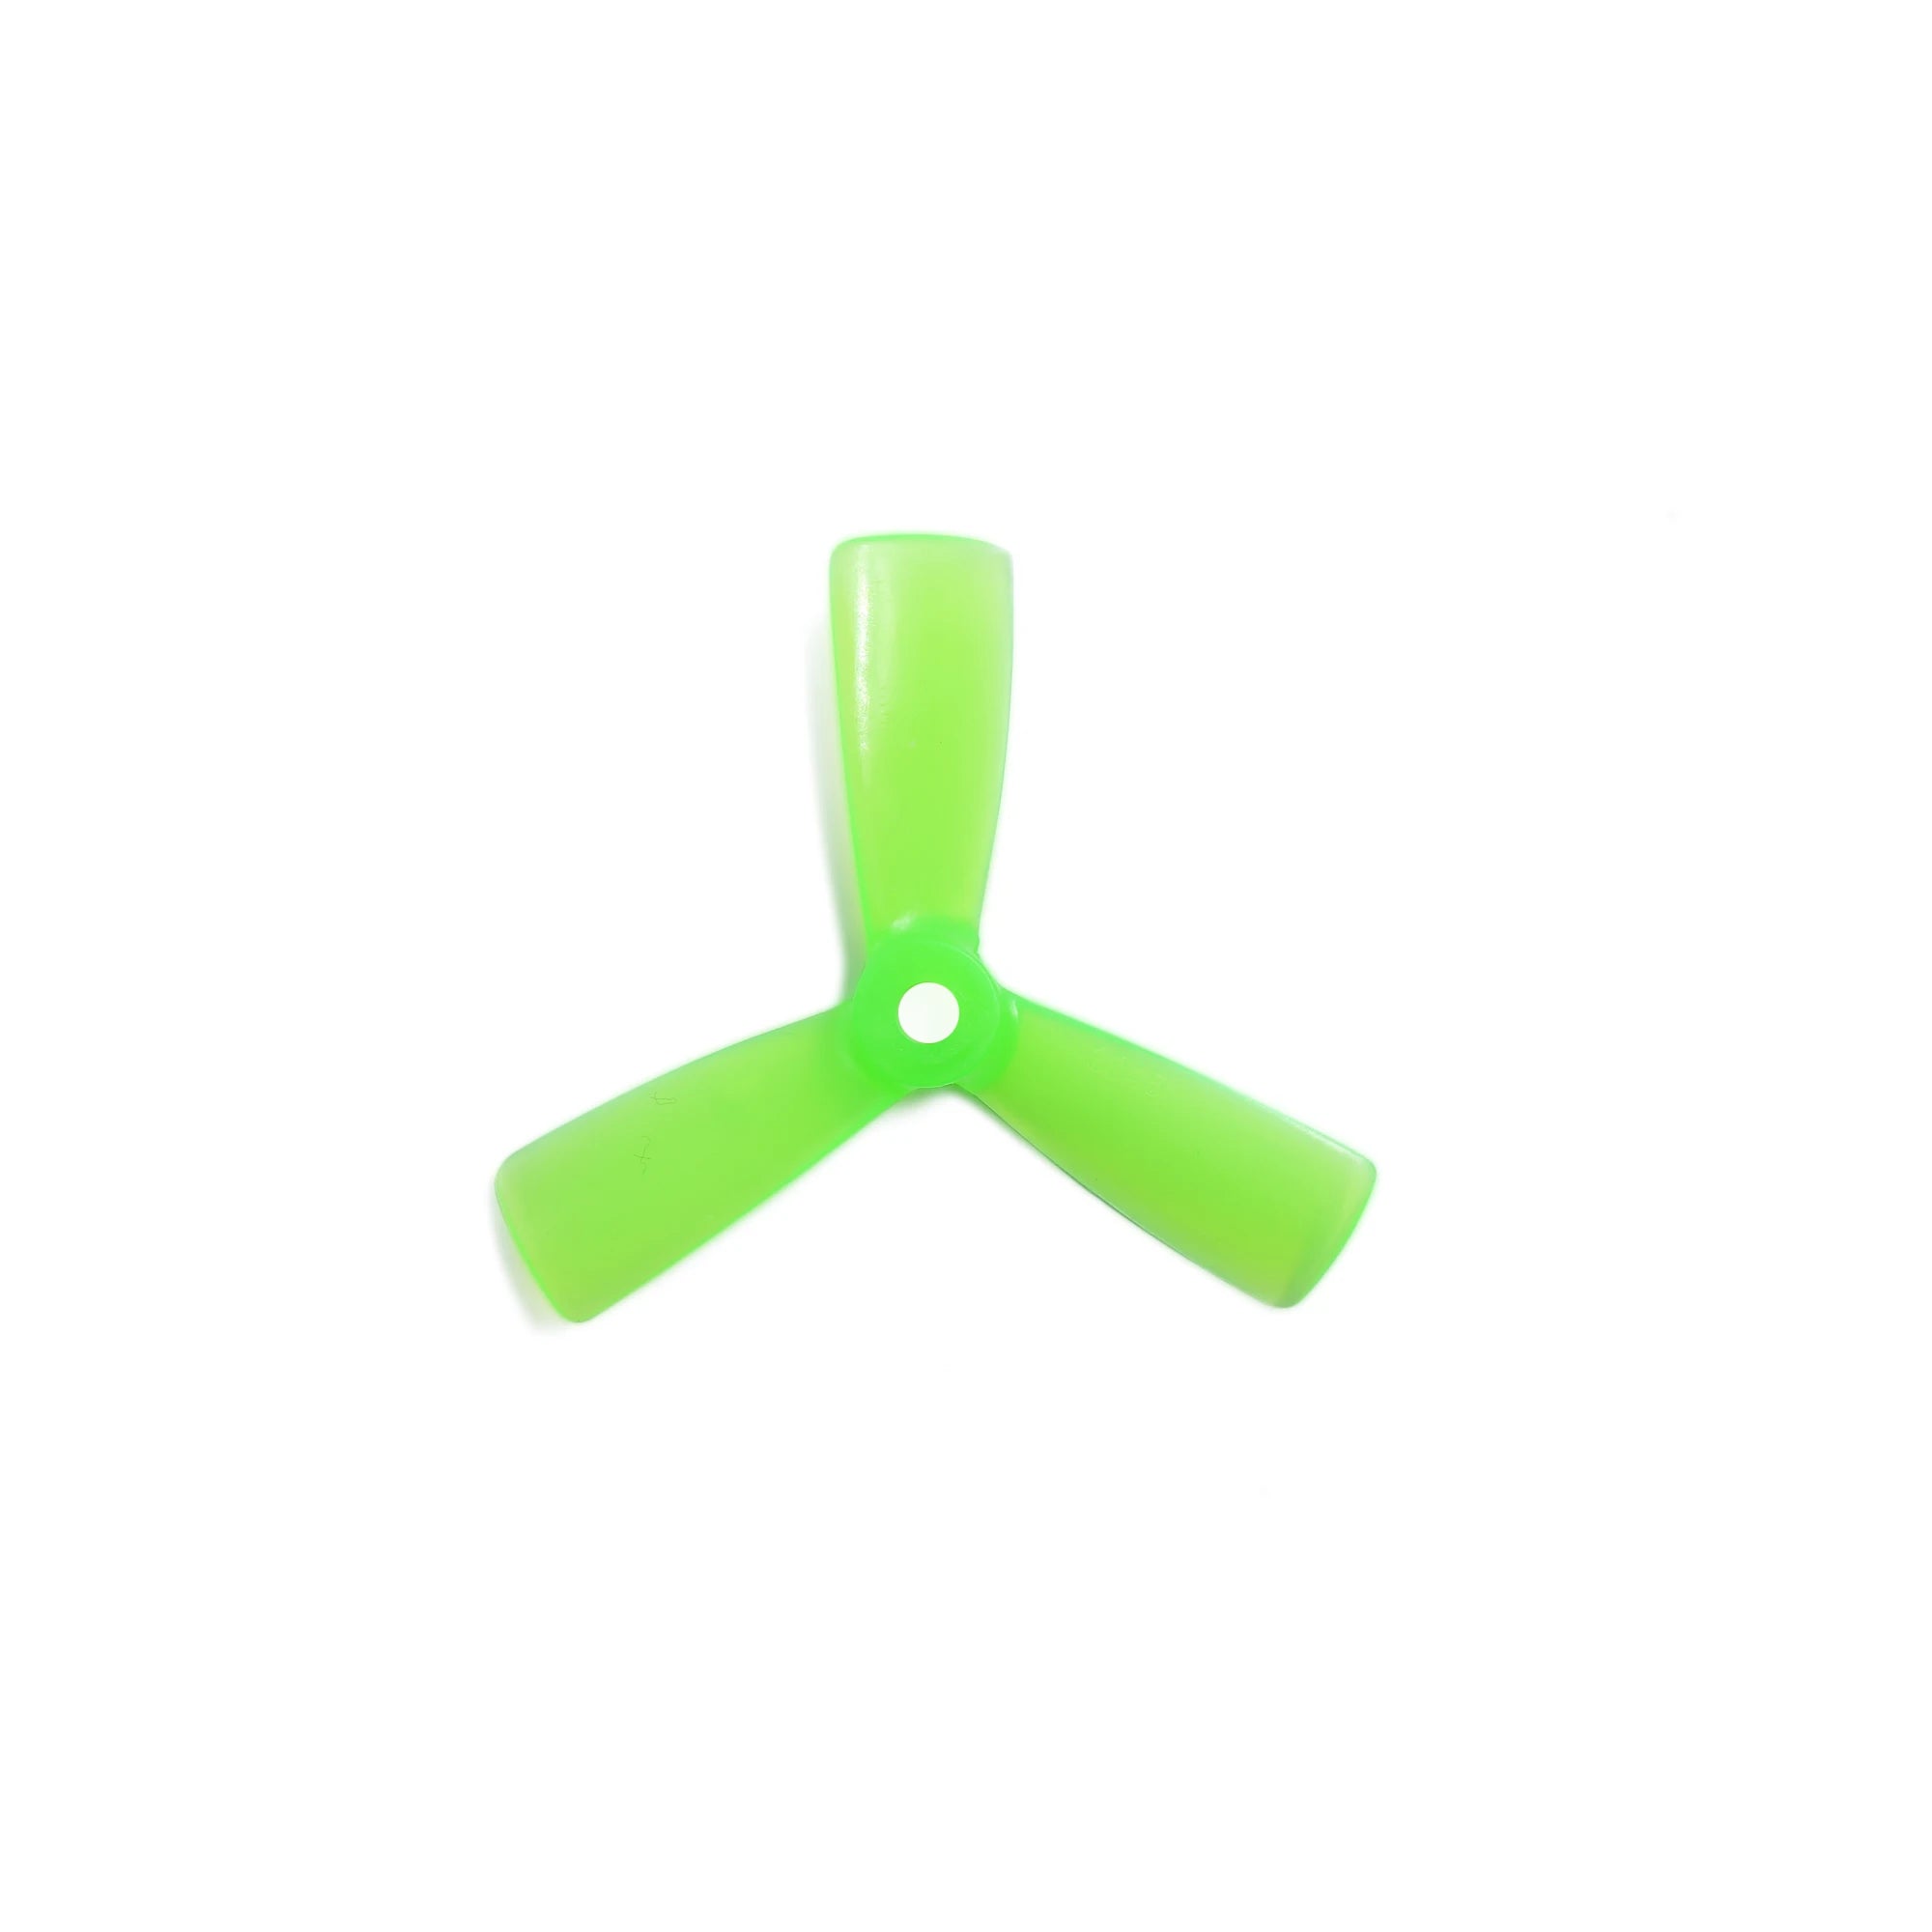 GEPRC G3045 Propeller, the optimized airfoil propeller design is not easy occurring such as blade flutter